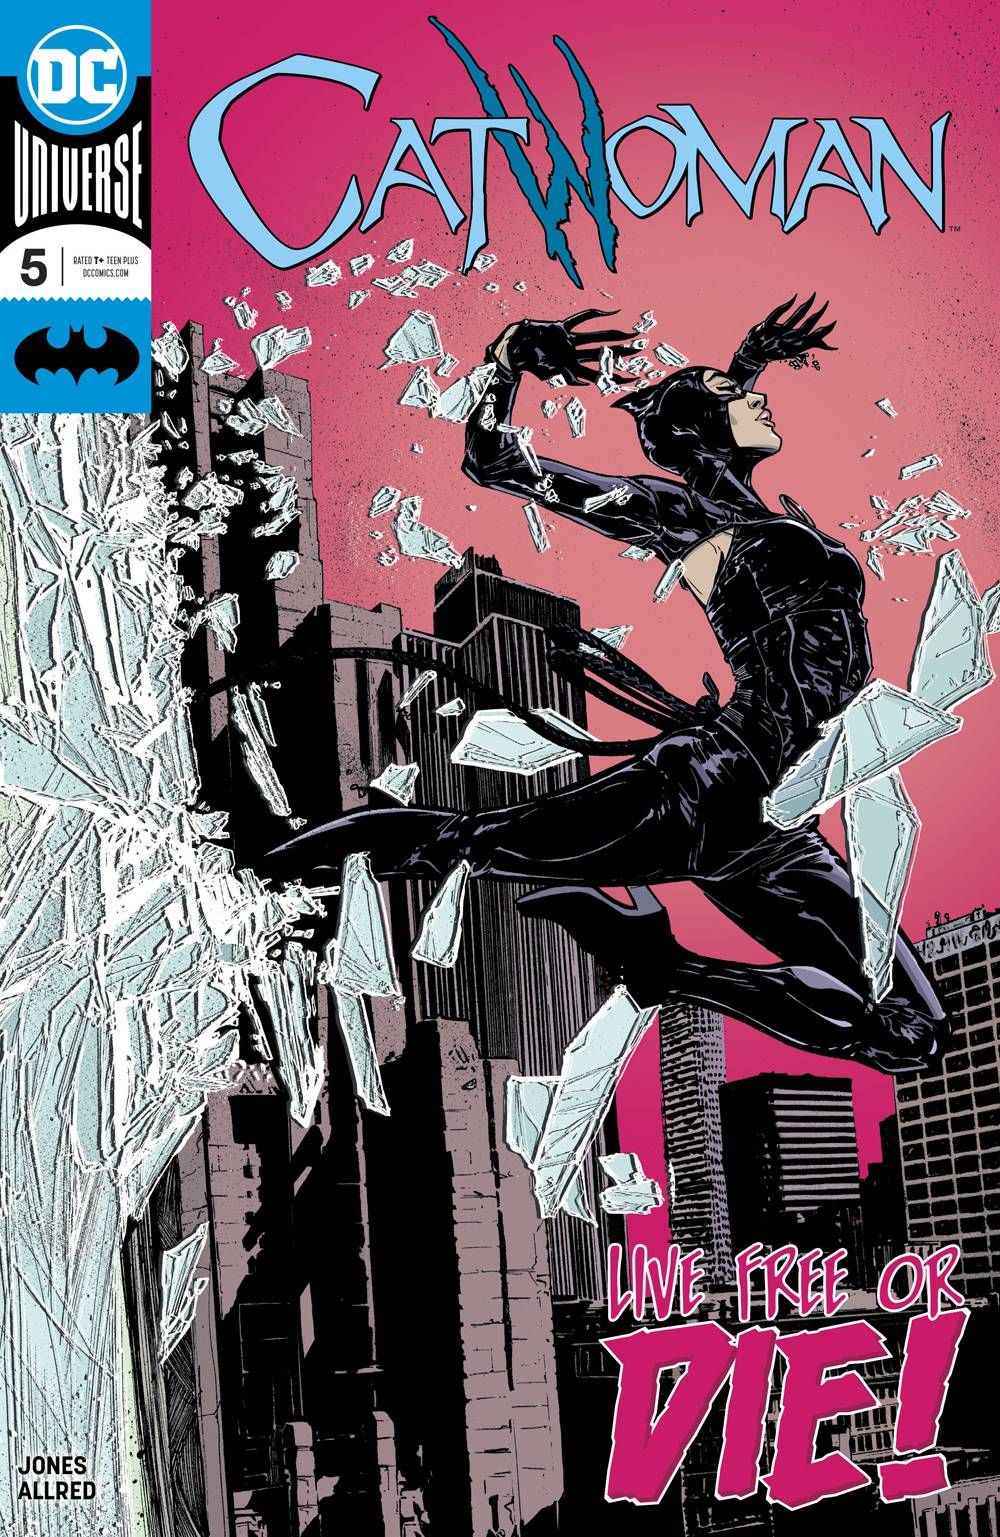 Catwoman #5 (2018)